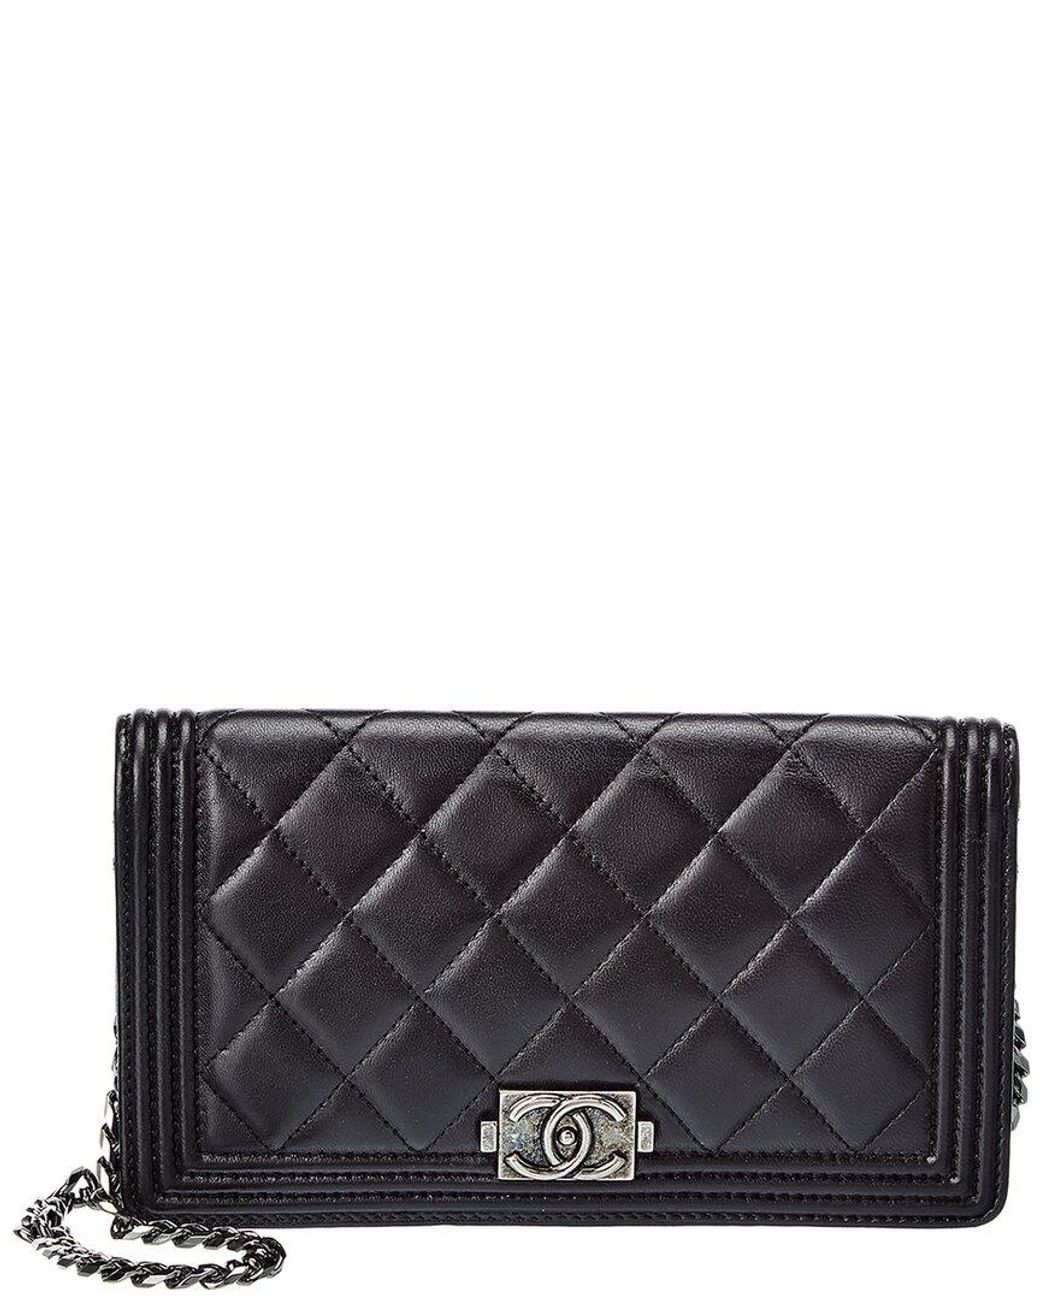 chanel business affinity mini price